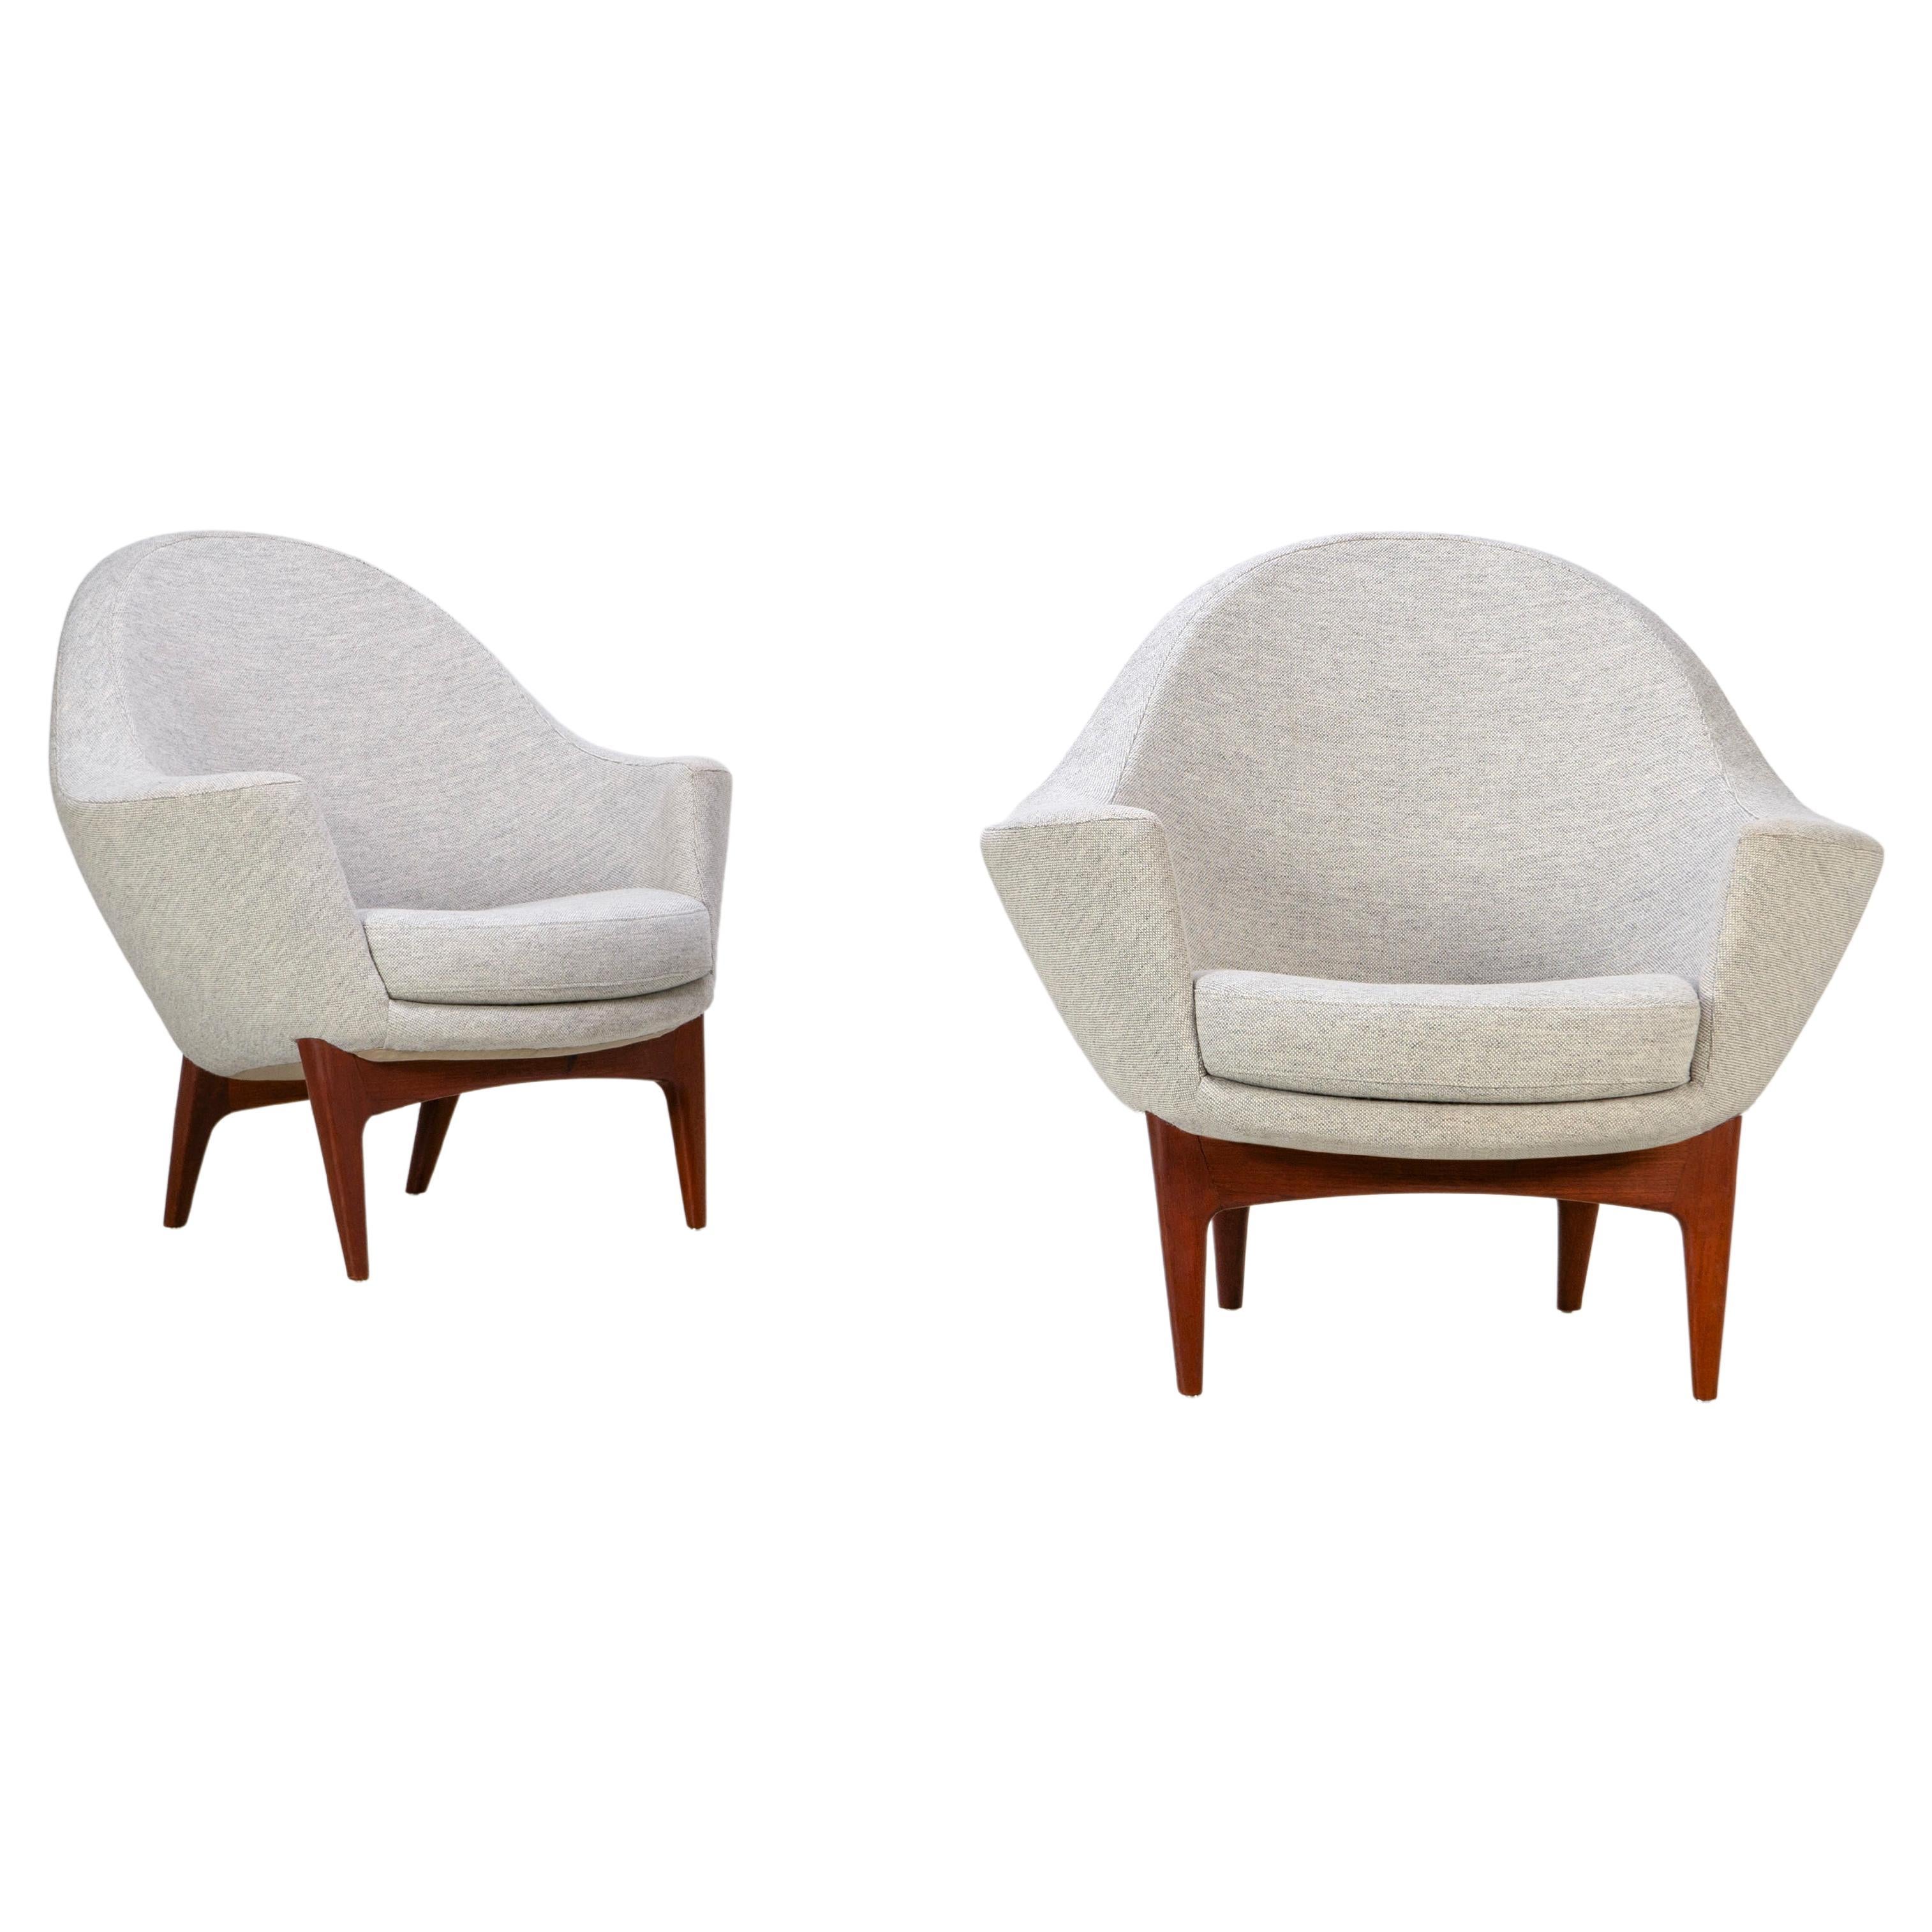 Rare Pair of Lounge Chairs by Ib Kofod Larsen for Fritz Hansen, 1959 For Sale